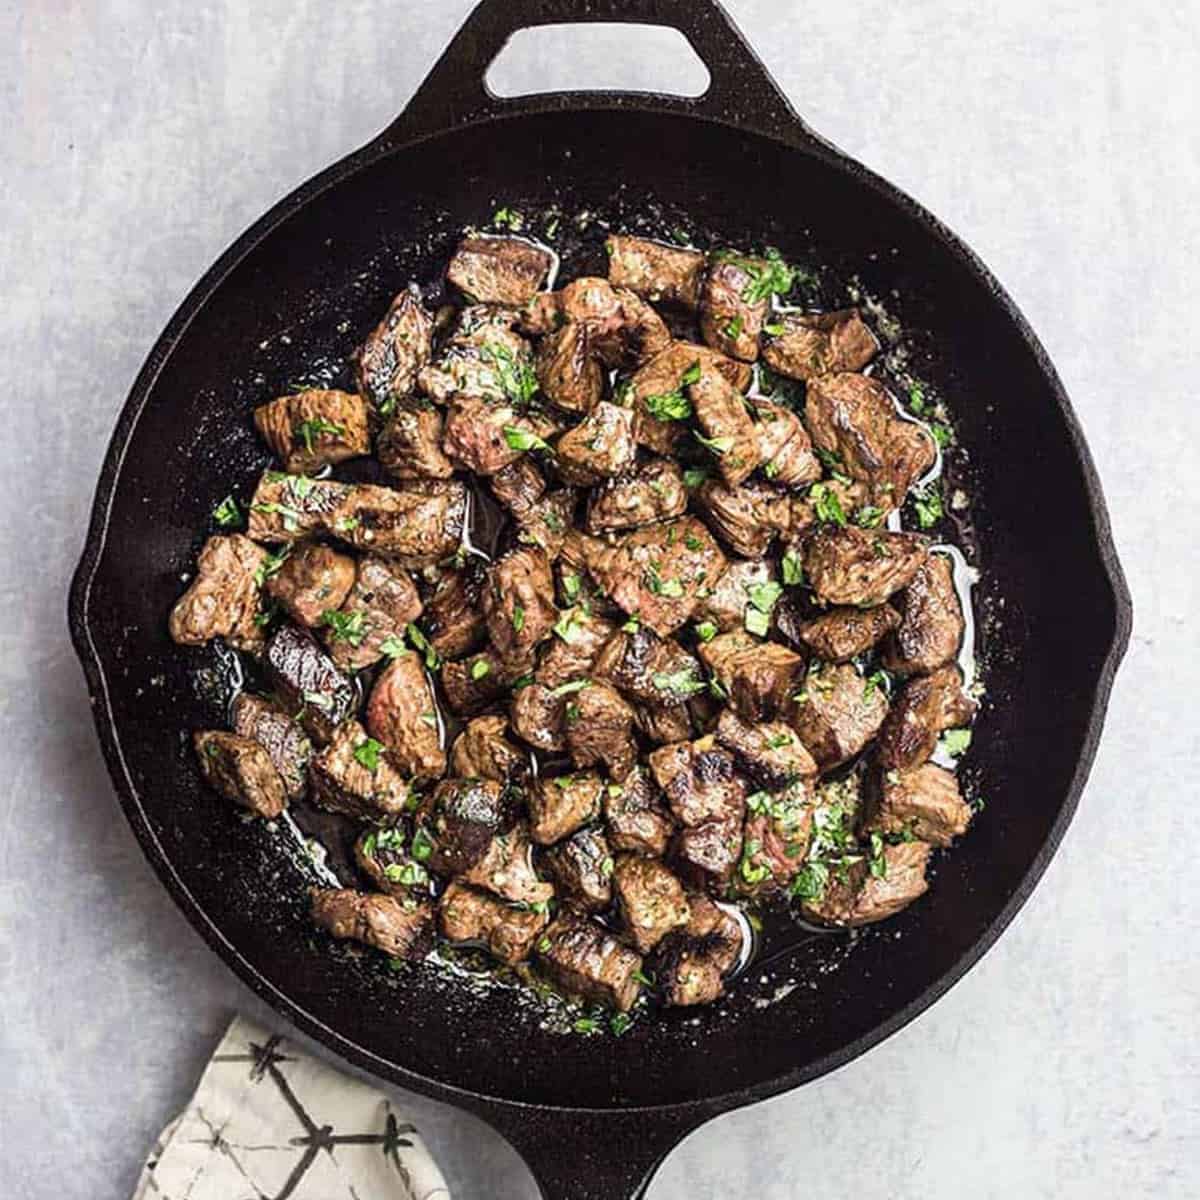 Steak bites in a cast iron skillet covered with garlic butter